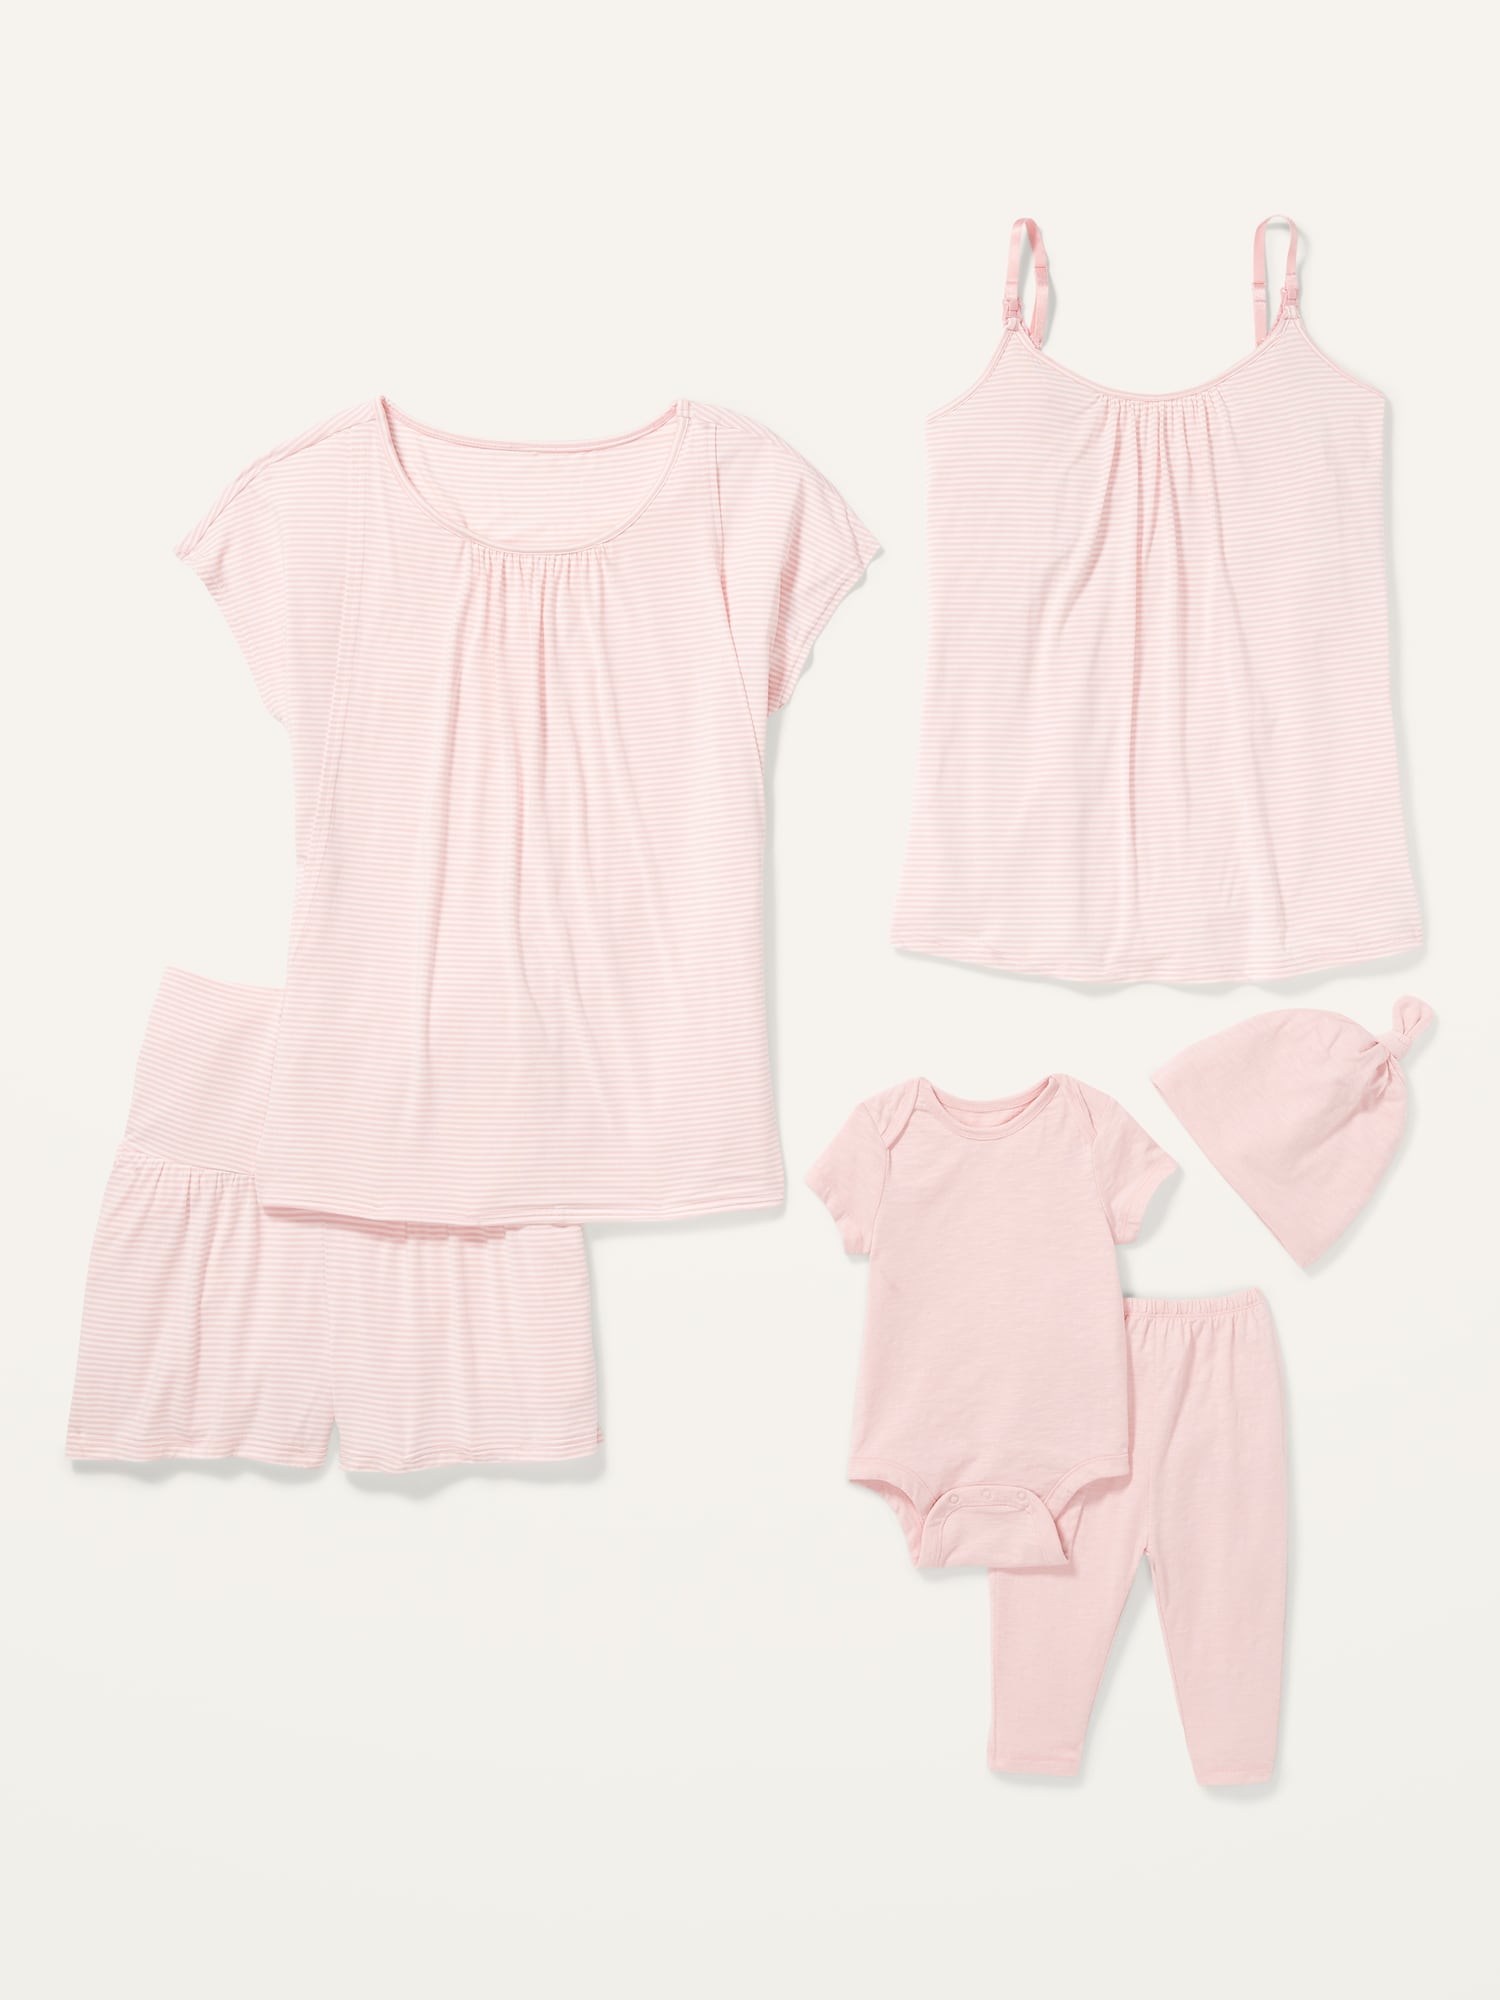 Old Navy Maternity Nursing Camisoles for Women